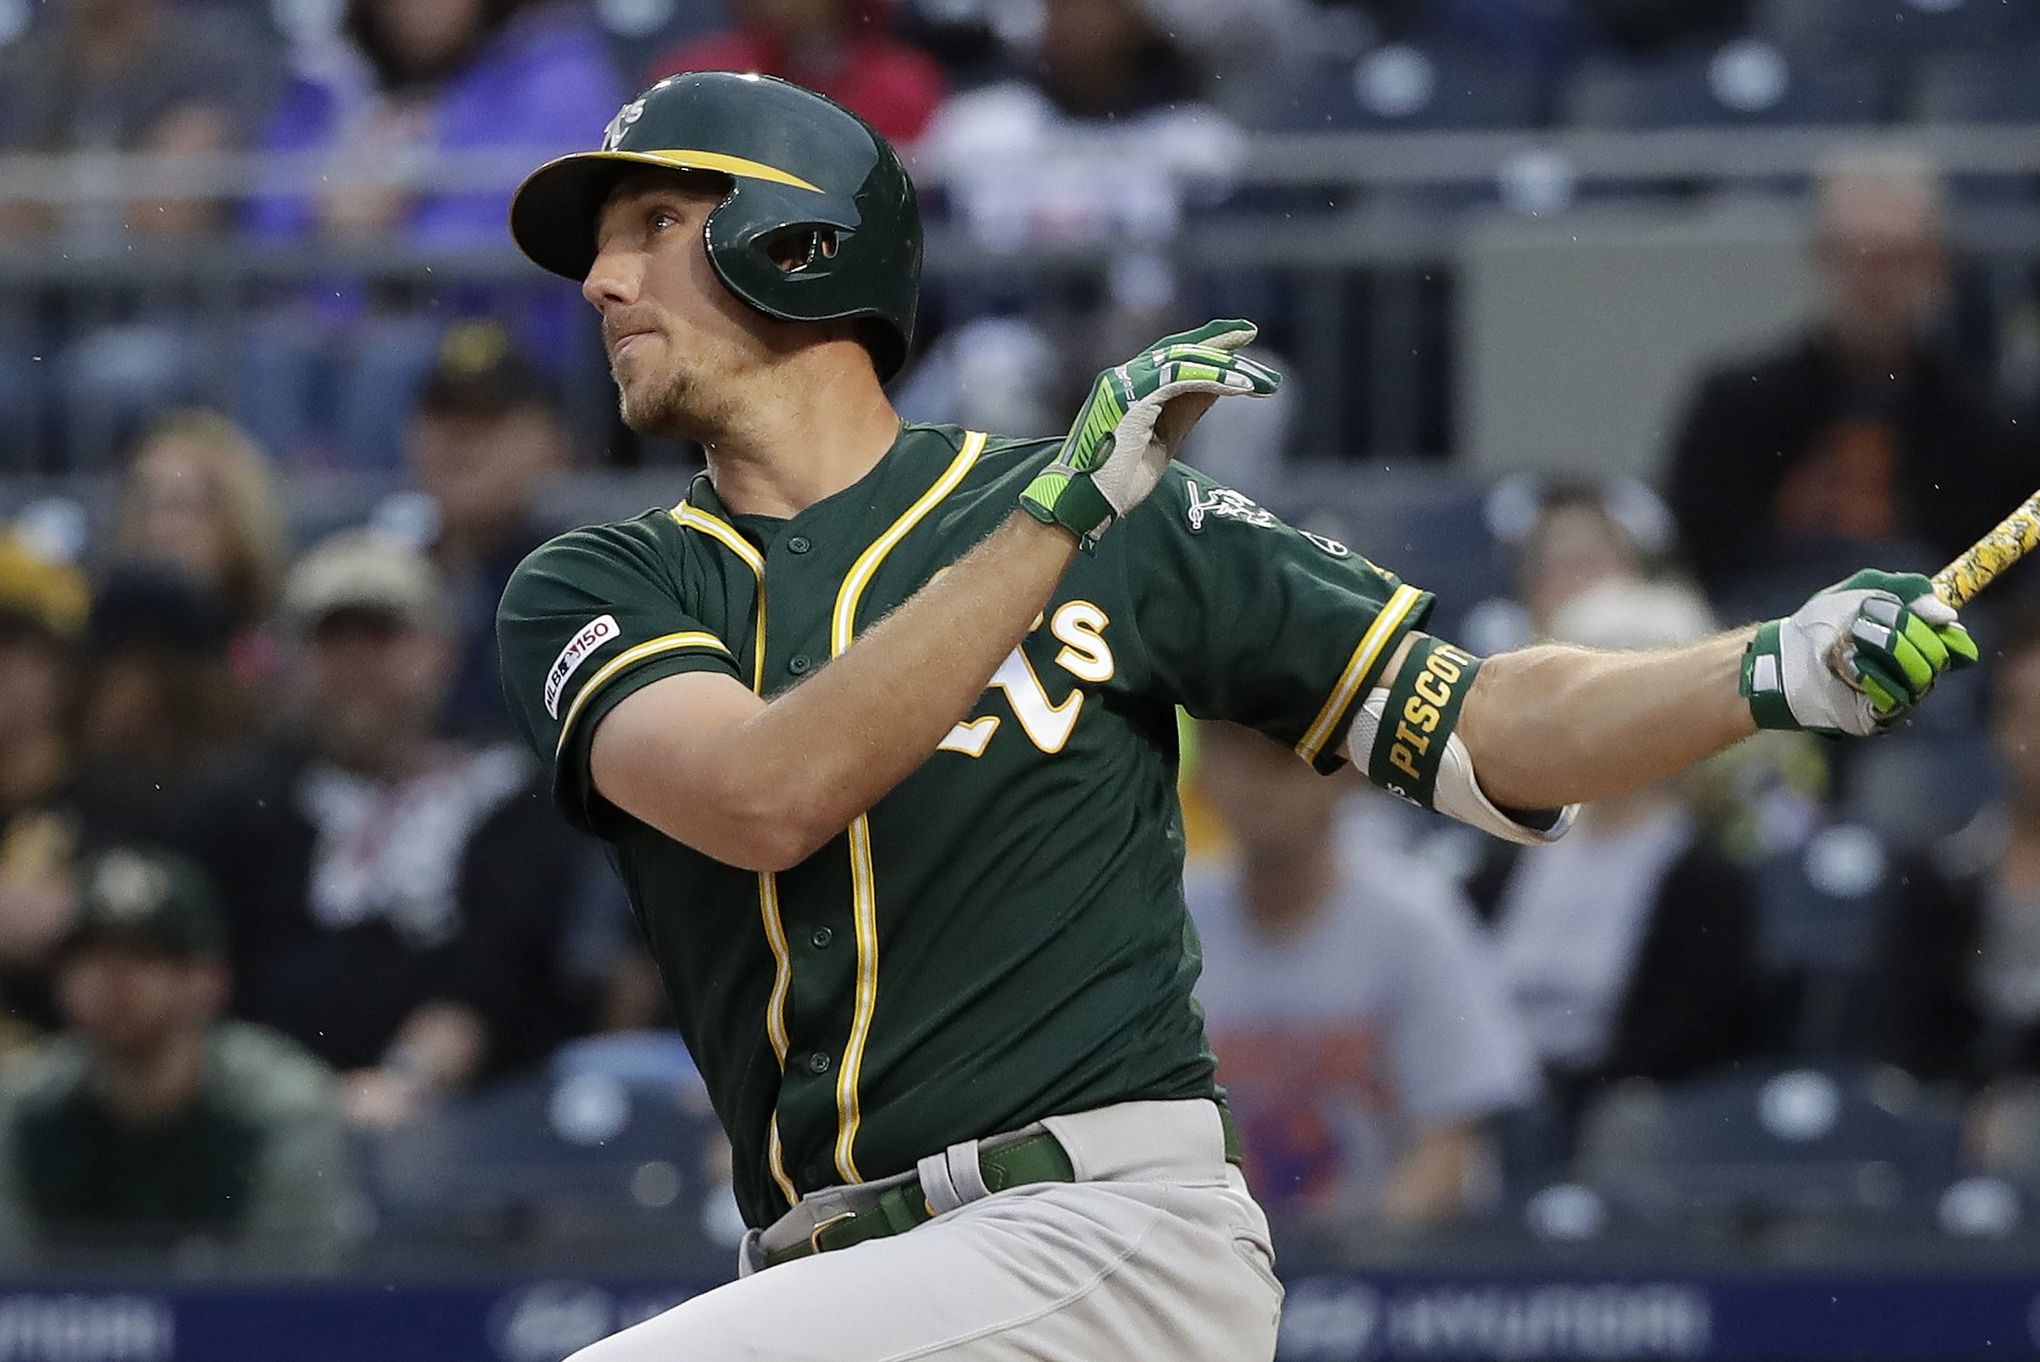 A's Stephen Piscotty, the 2019 Hutch Award winner, on mission to find cure  for ALS after losing mother